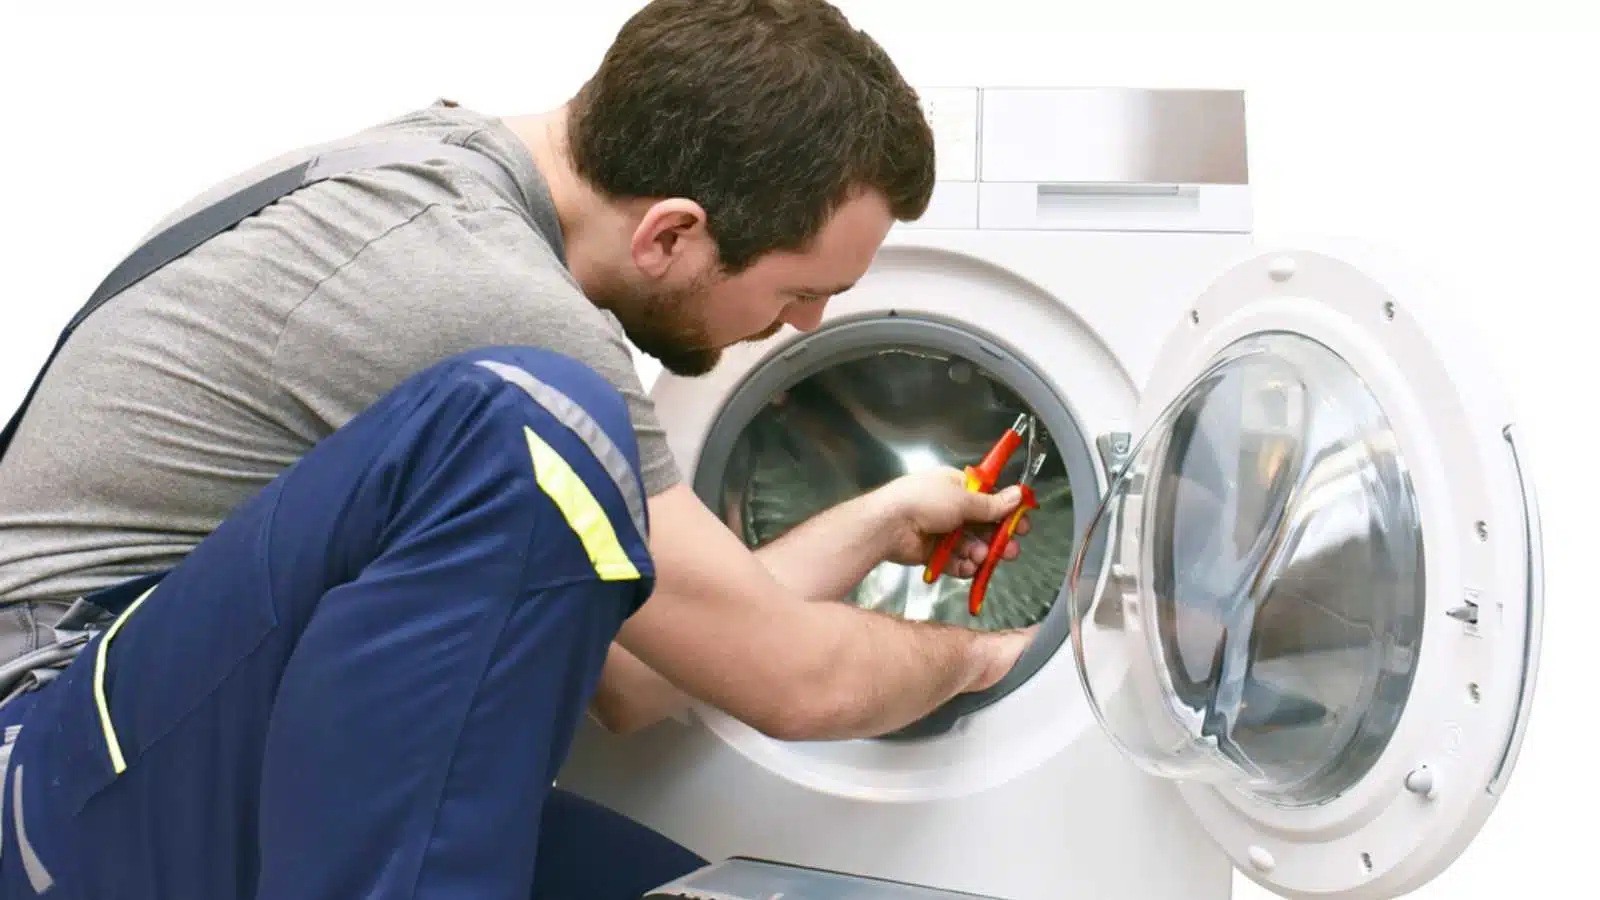 repair washing machine by a service technician at customer's home - insulated on white background